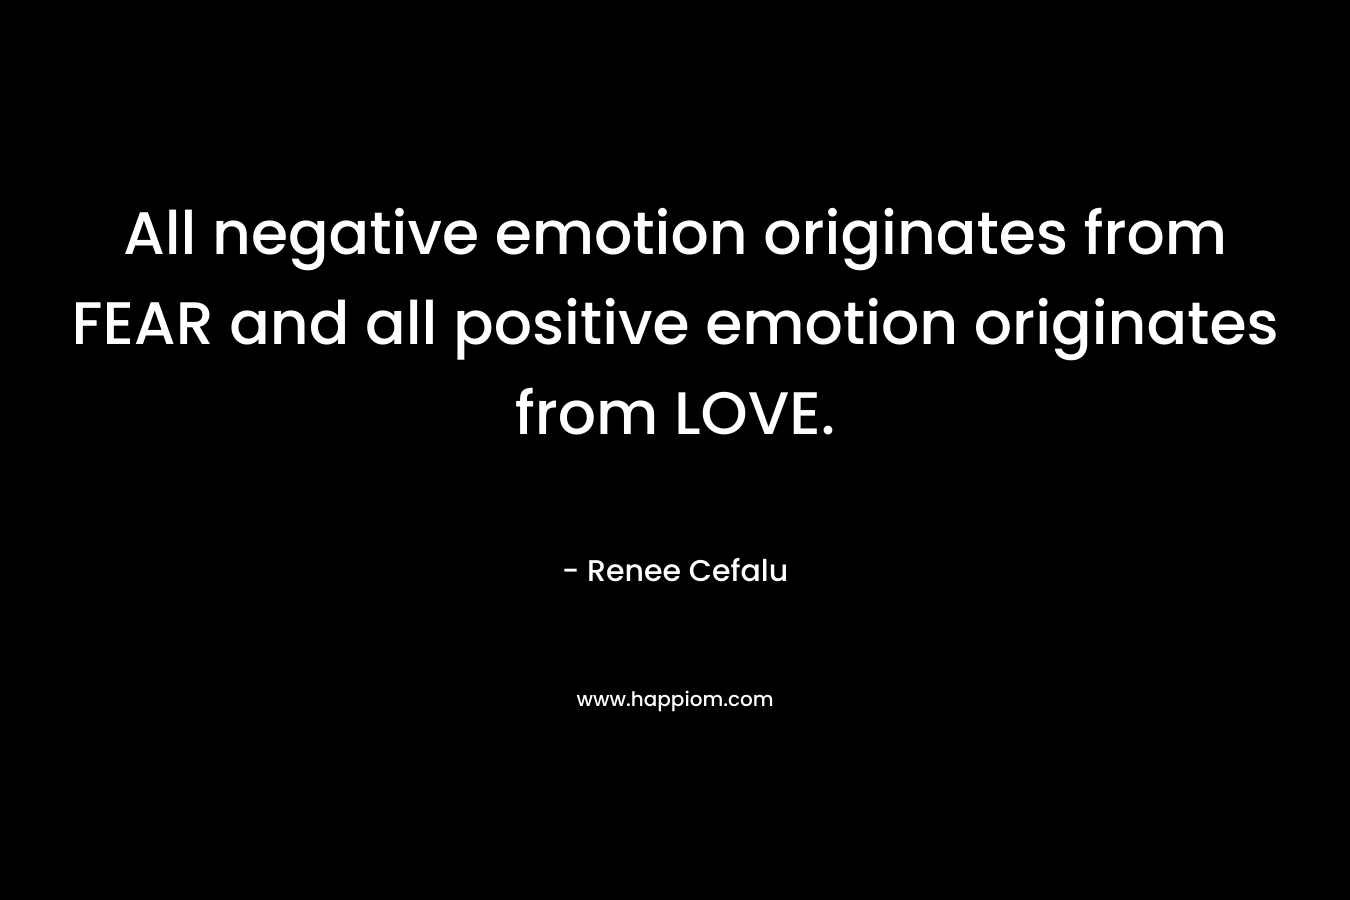 All negative emotion originates from FEAR and all positive emotion originates from LOVE.